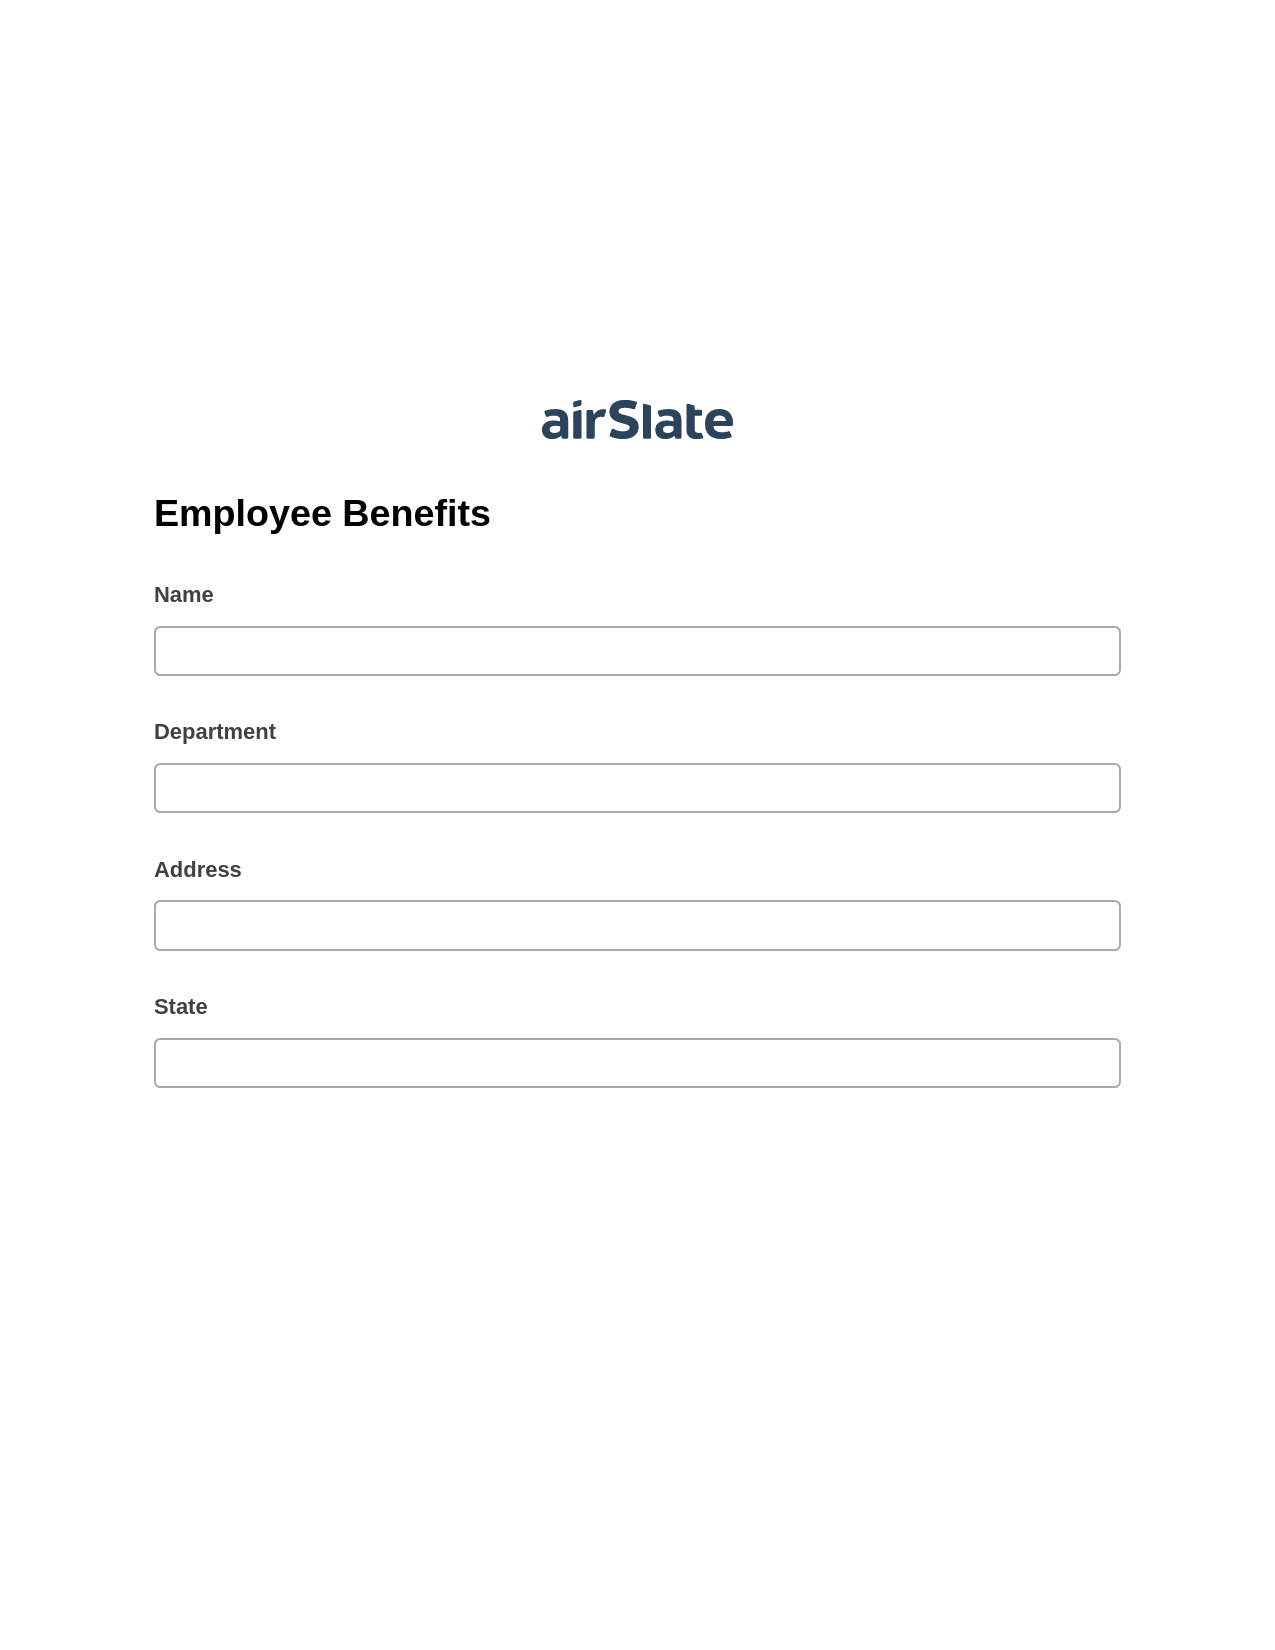 Employee Benefits Pre-fill from CSV File Bot, Create slate from another Flow Bot, OneDrive Bot